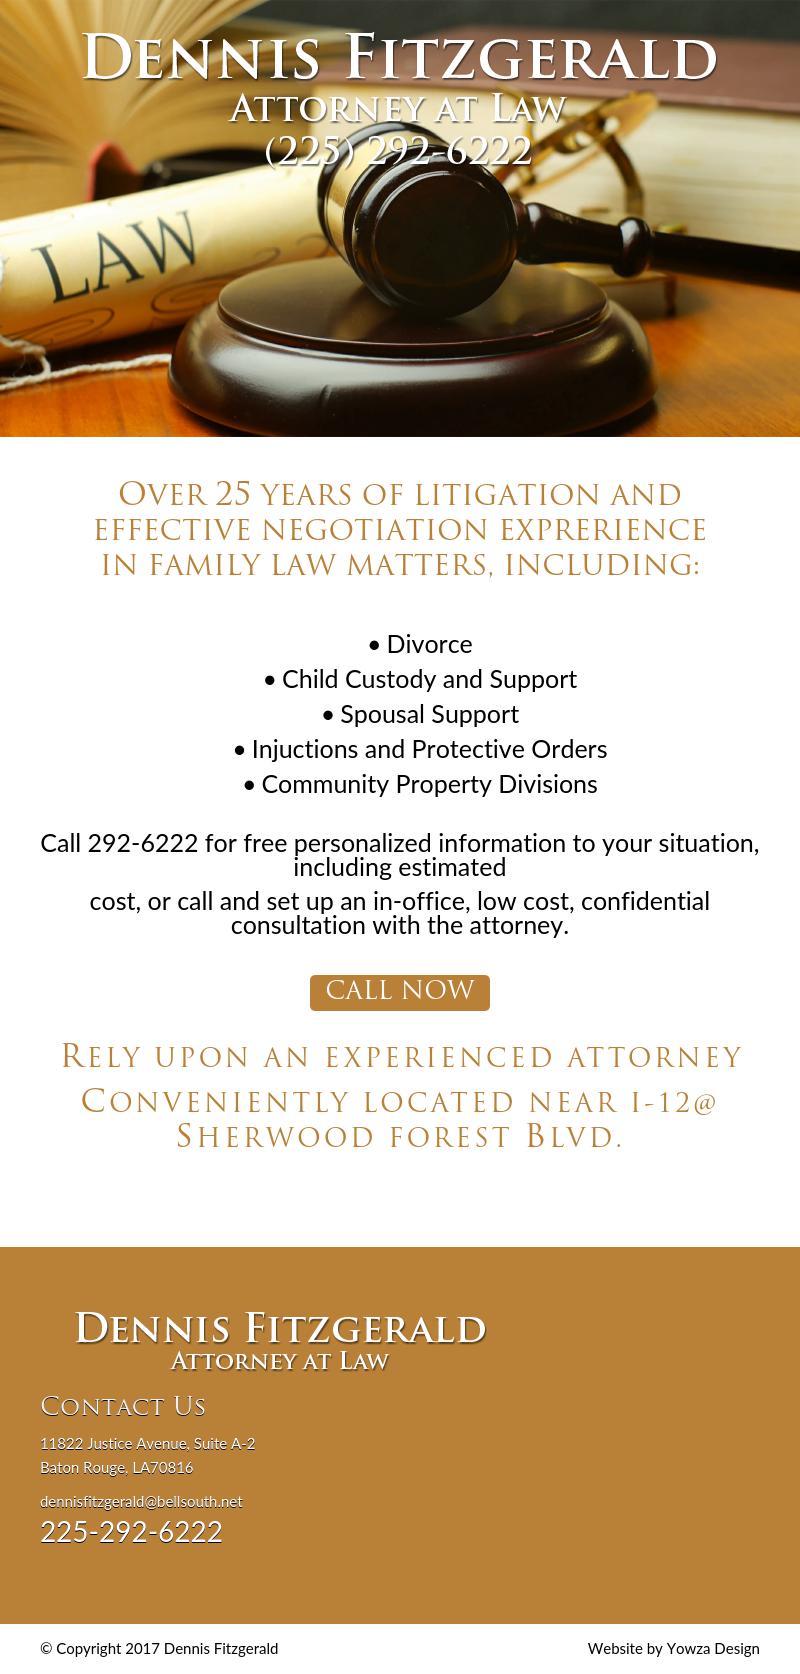 Fitzgerald Dennis Attorney At Law - Baton Rouge LA Lawyers